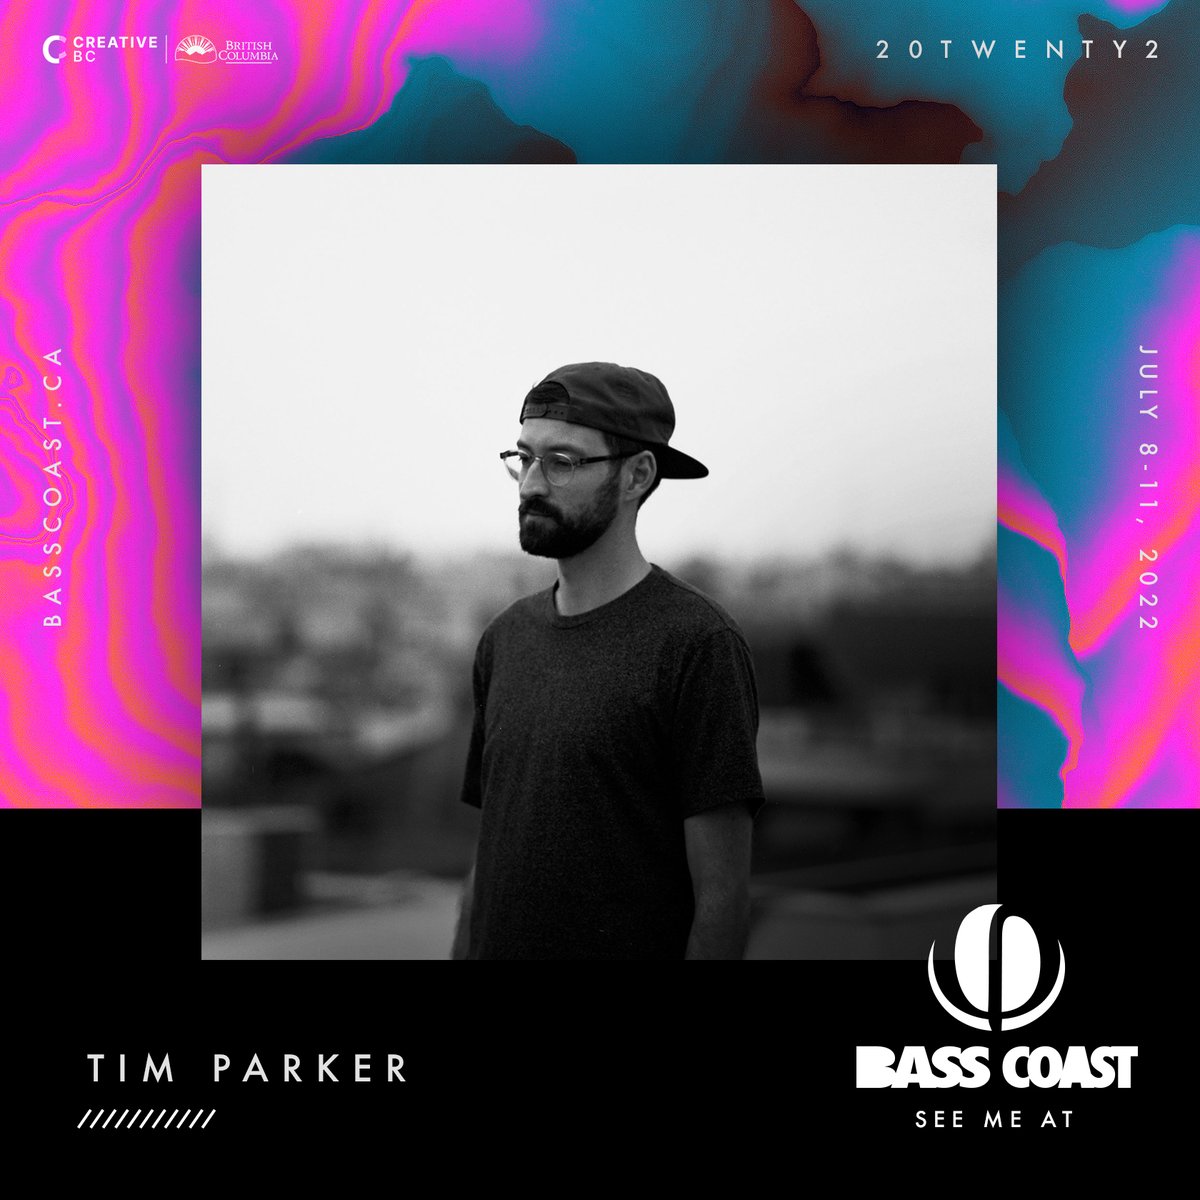 I'm stoked to be performing at @basscoastfest this year! Explore the full lineup at basscoast.ca

#takemetobasscoast #basscoast2022